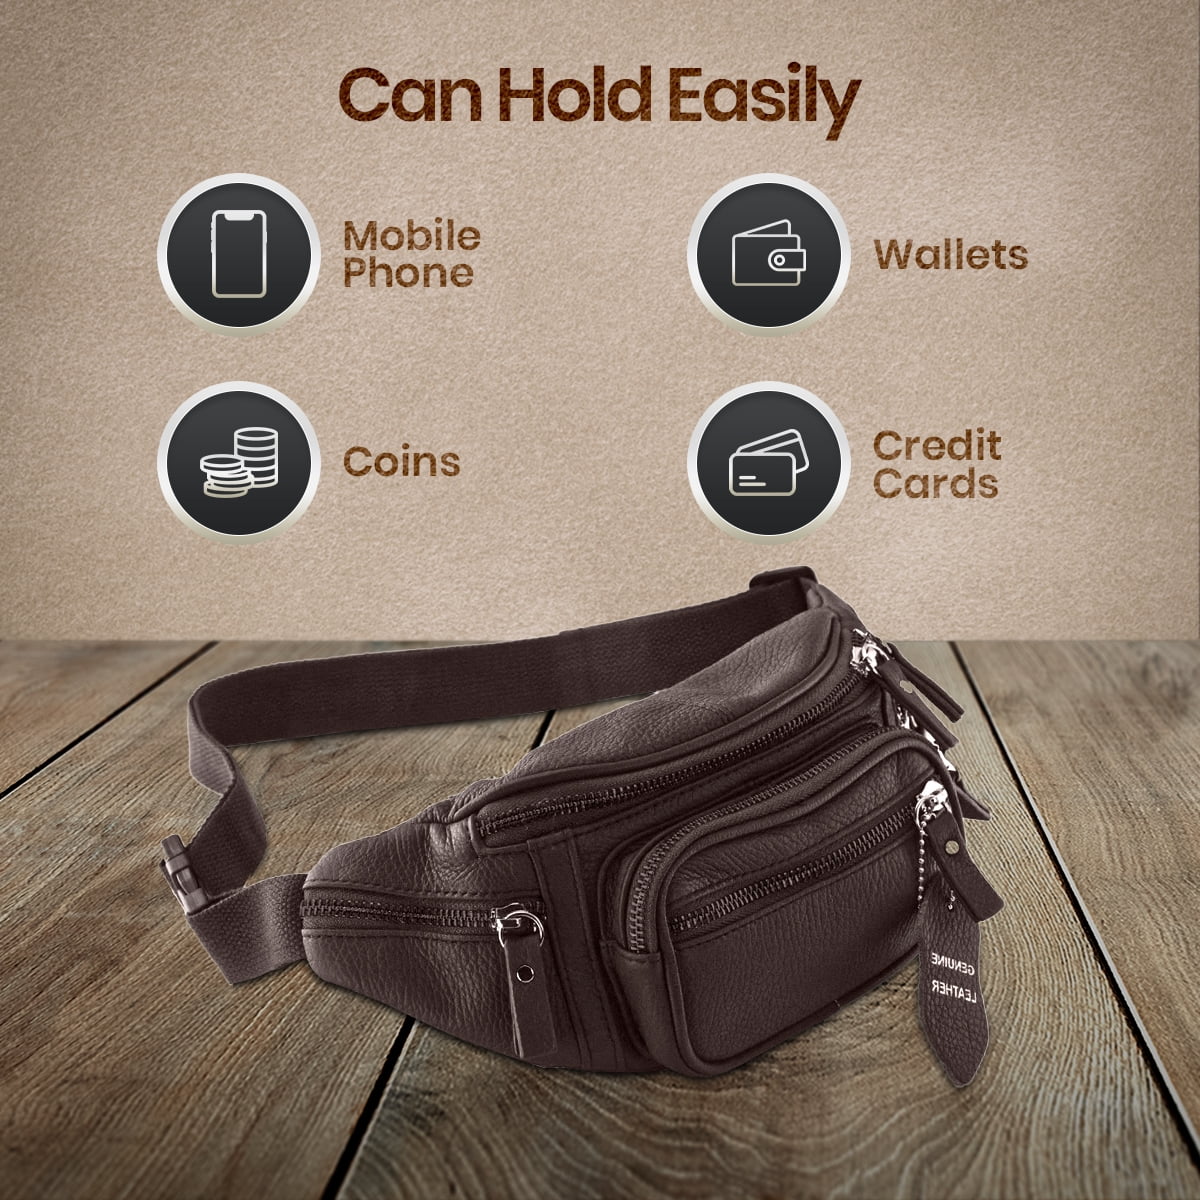 Black Fanny Pack Sheep Leather Waist Bag Pack for Men Women Travel Pouch  Bag, Multiple Pockets & Durable Belt for Hiking Running Cycling